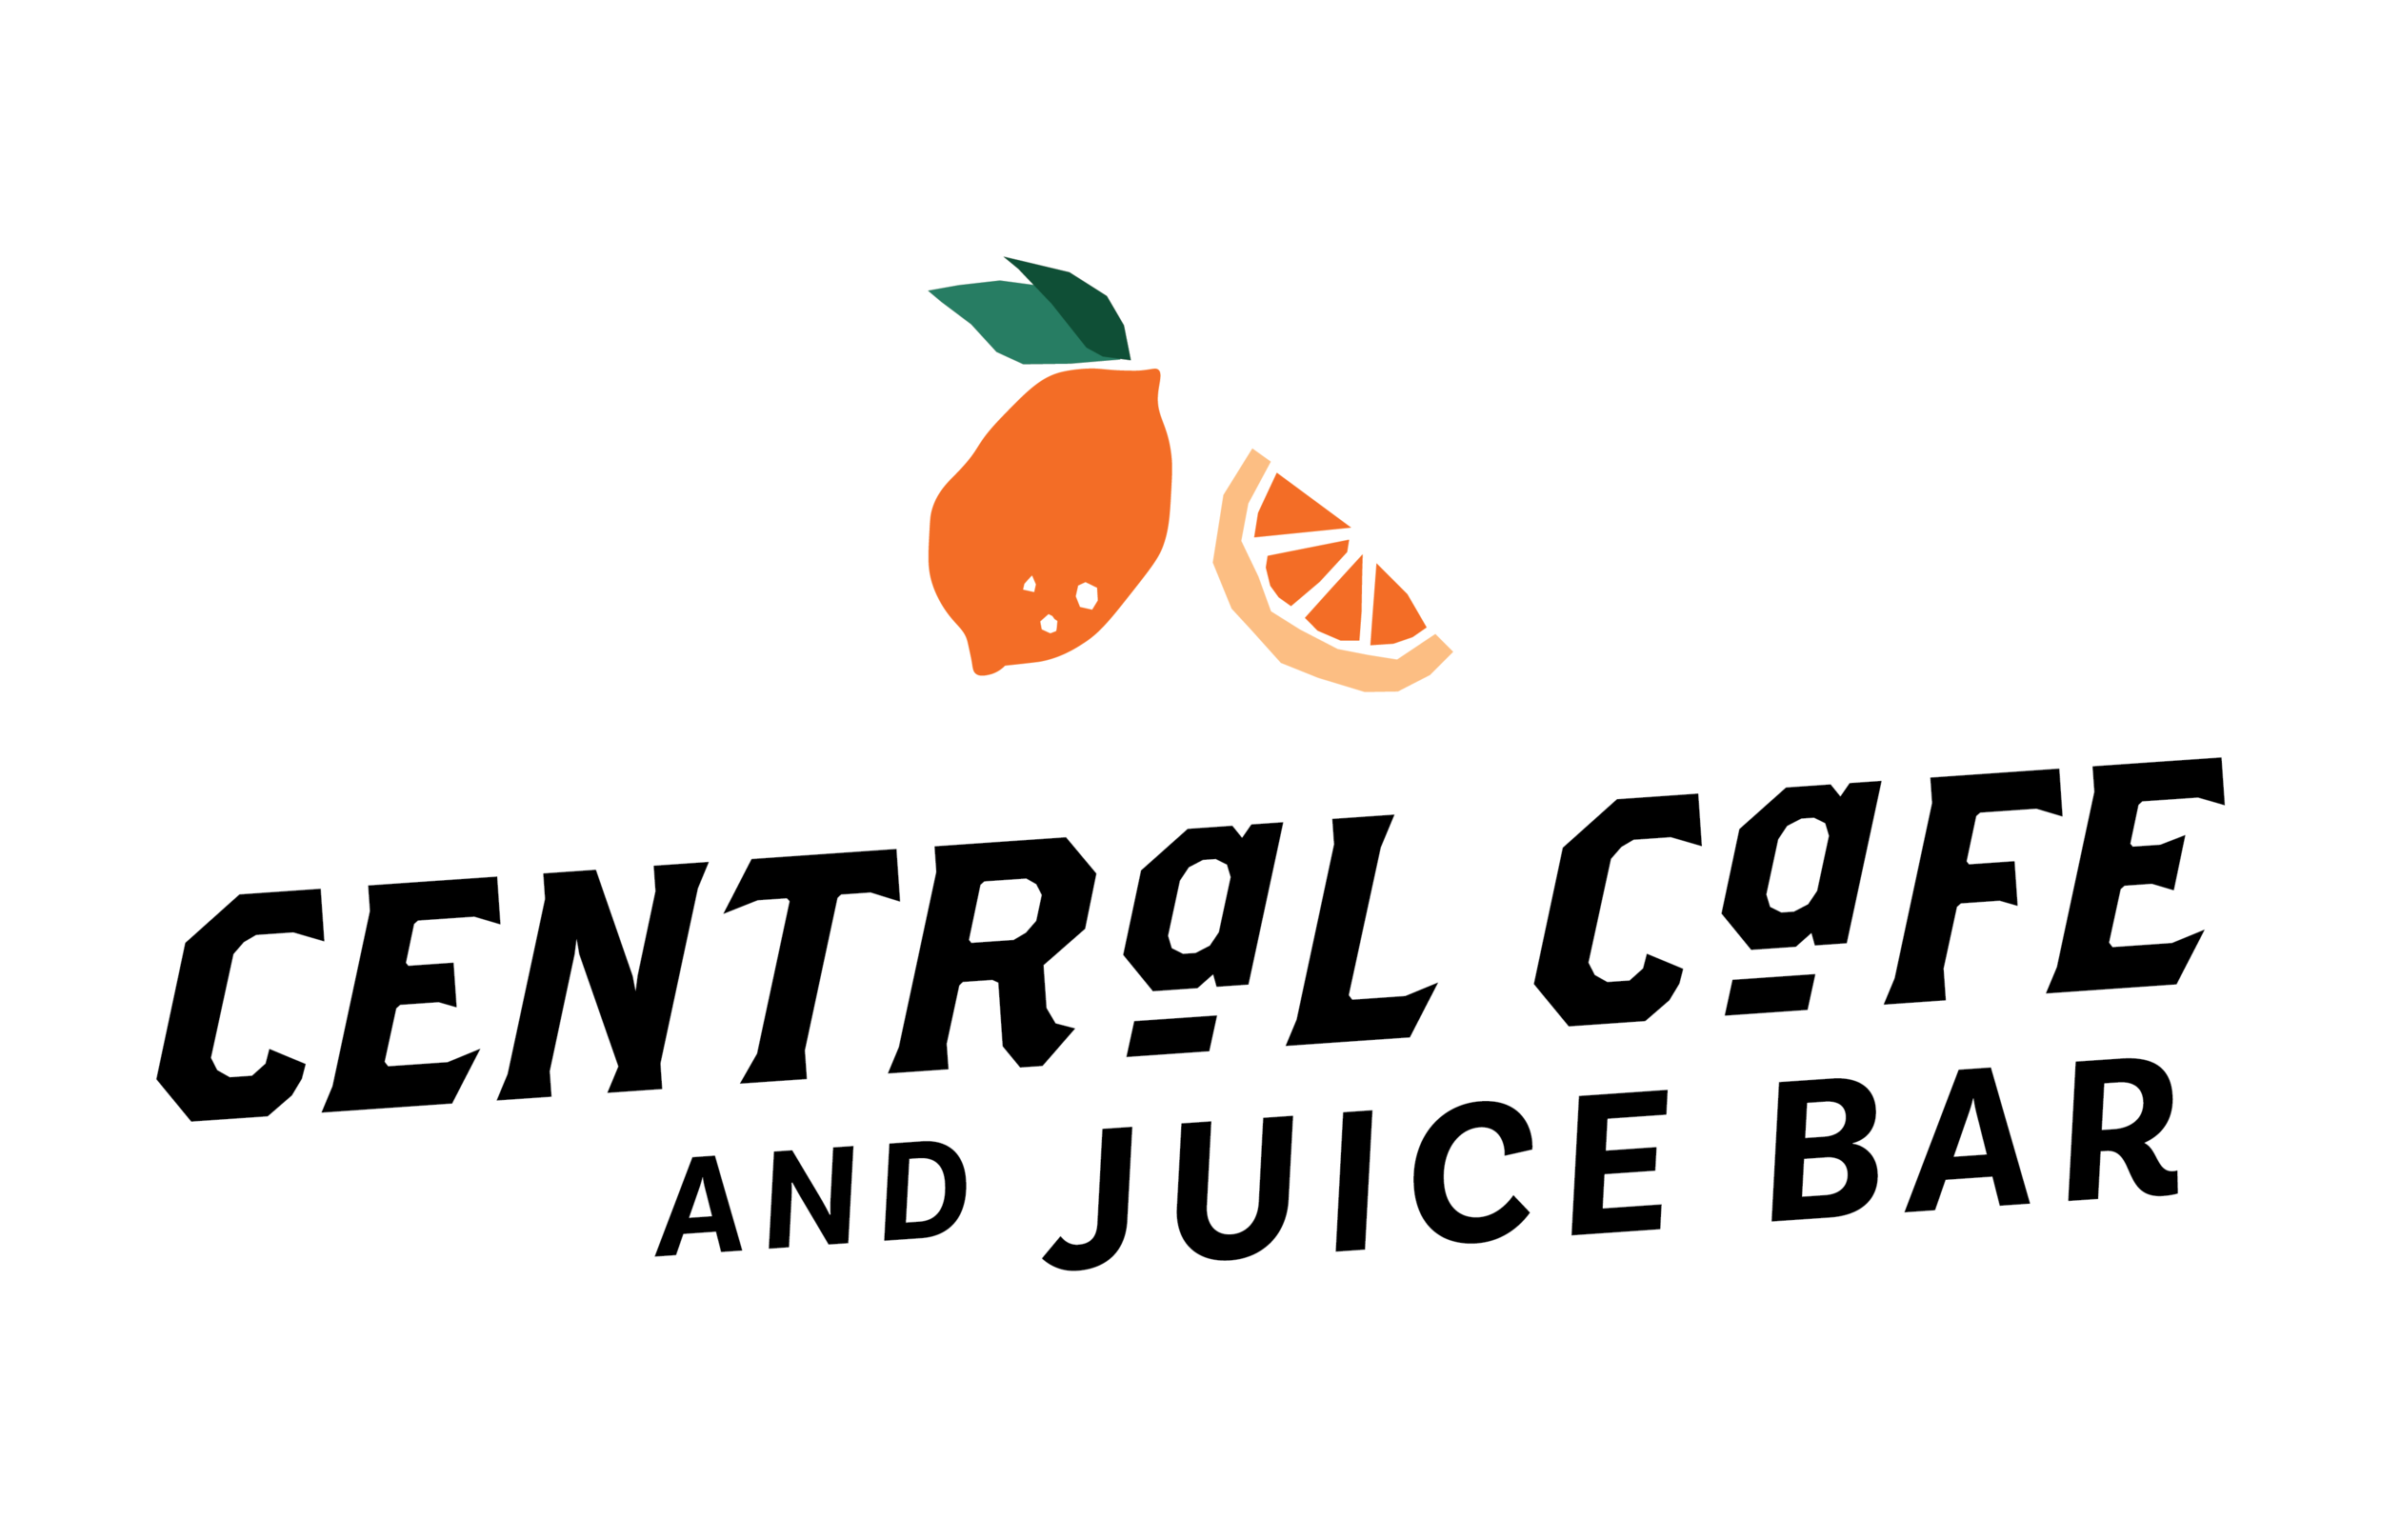 Central Cafe and Juice Bar